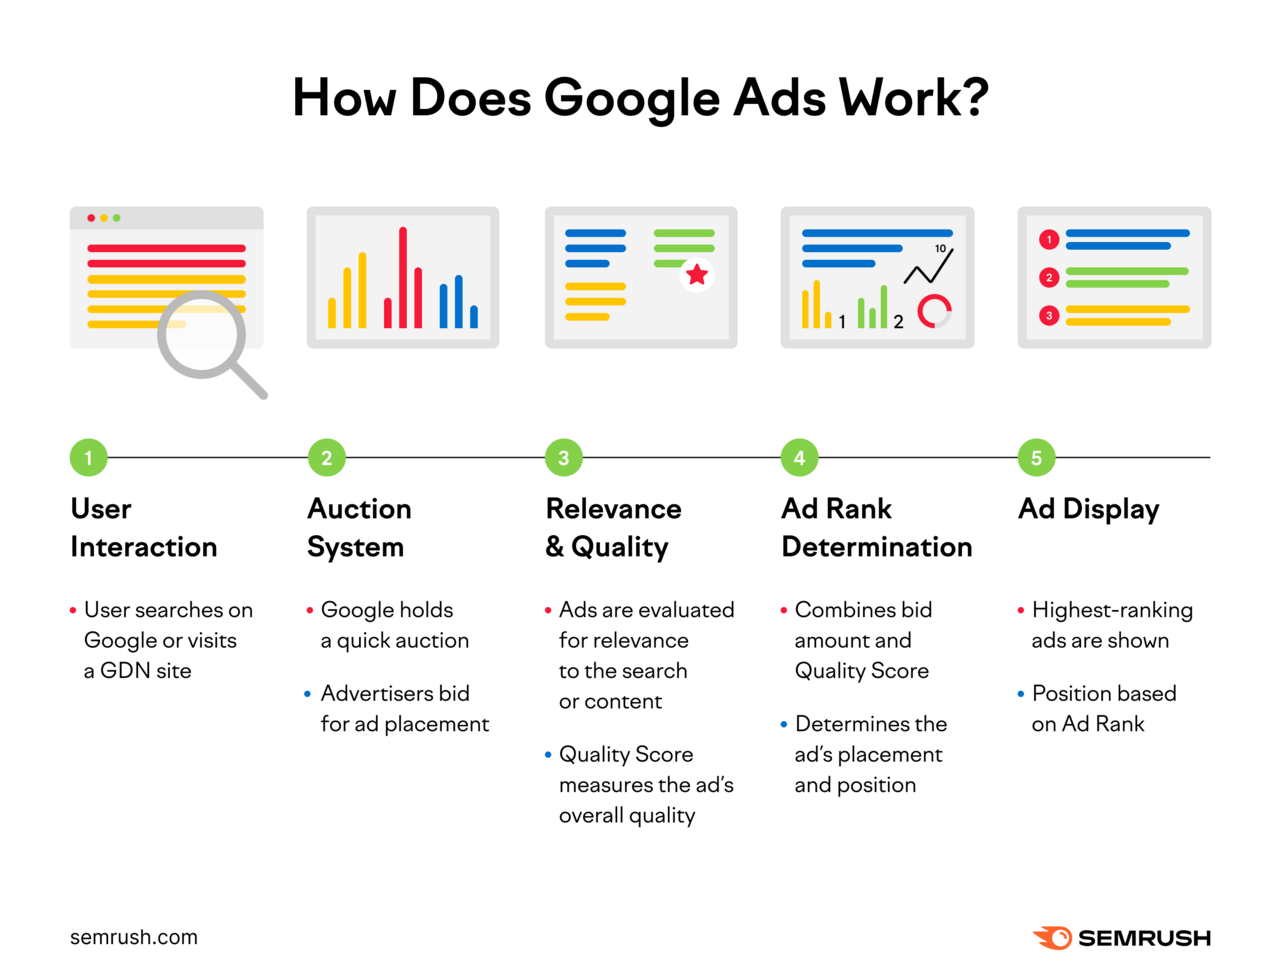 Google Ads works by user interacting with Google, advertisers bid for ad placement, Google evaluates the ad, Google determines ad rank, then the ad is displayed.